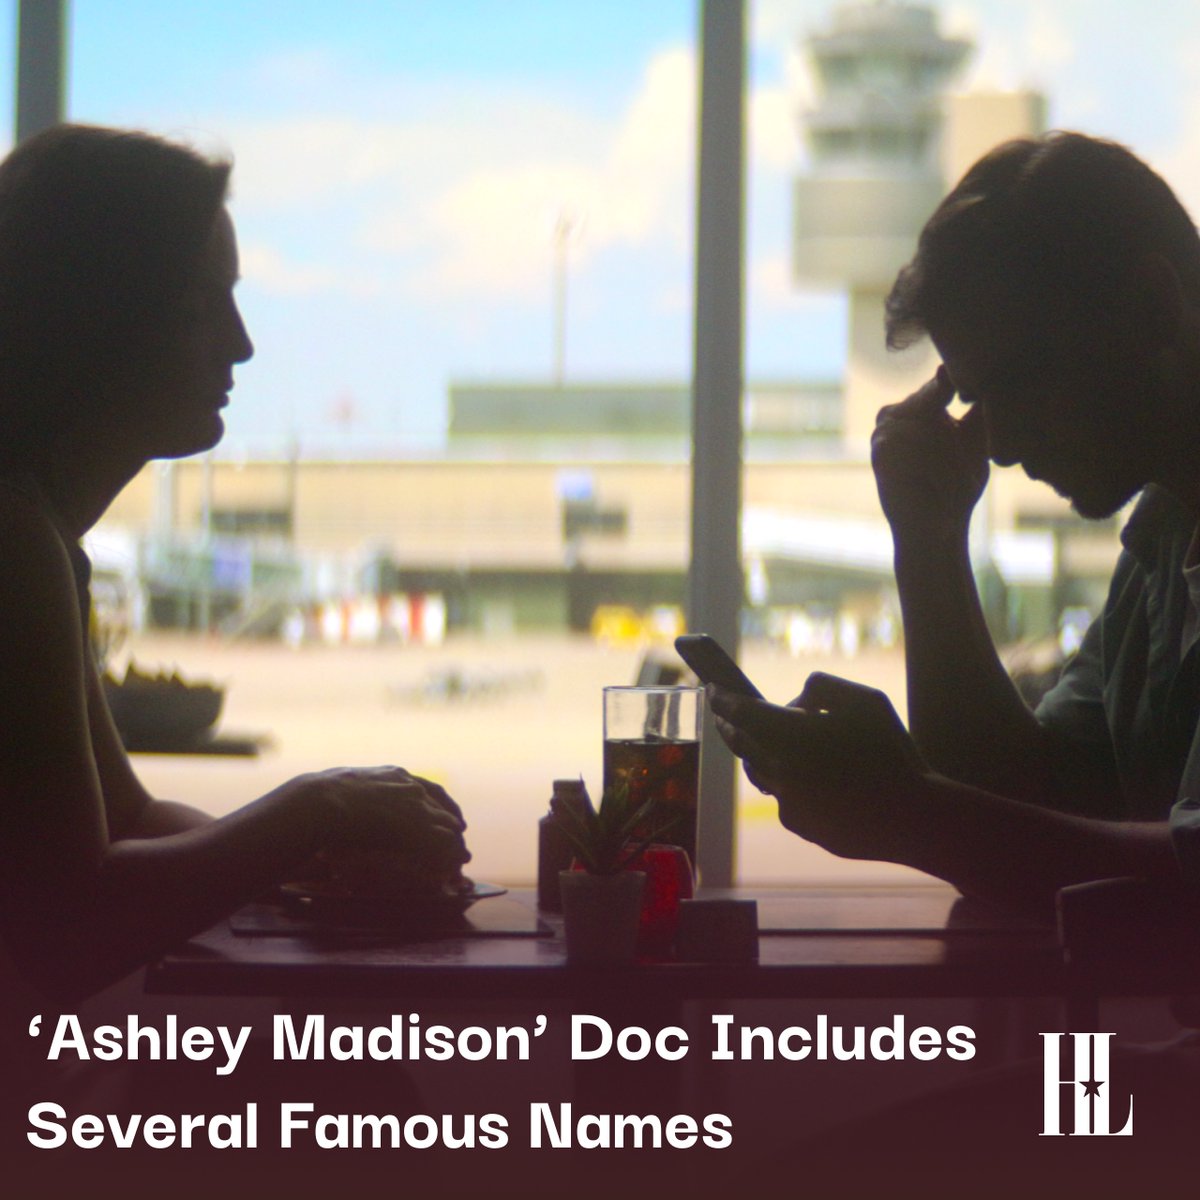 Netflix's 'Ashley Madison' doc pulls the curtain back on the controversial infidelity website. Learn more here hollywoodlife.com/feature/ashley…